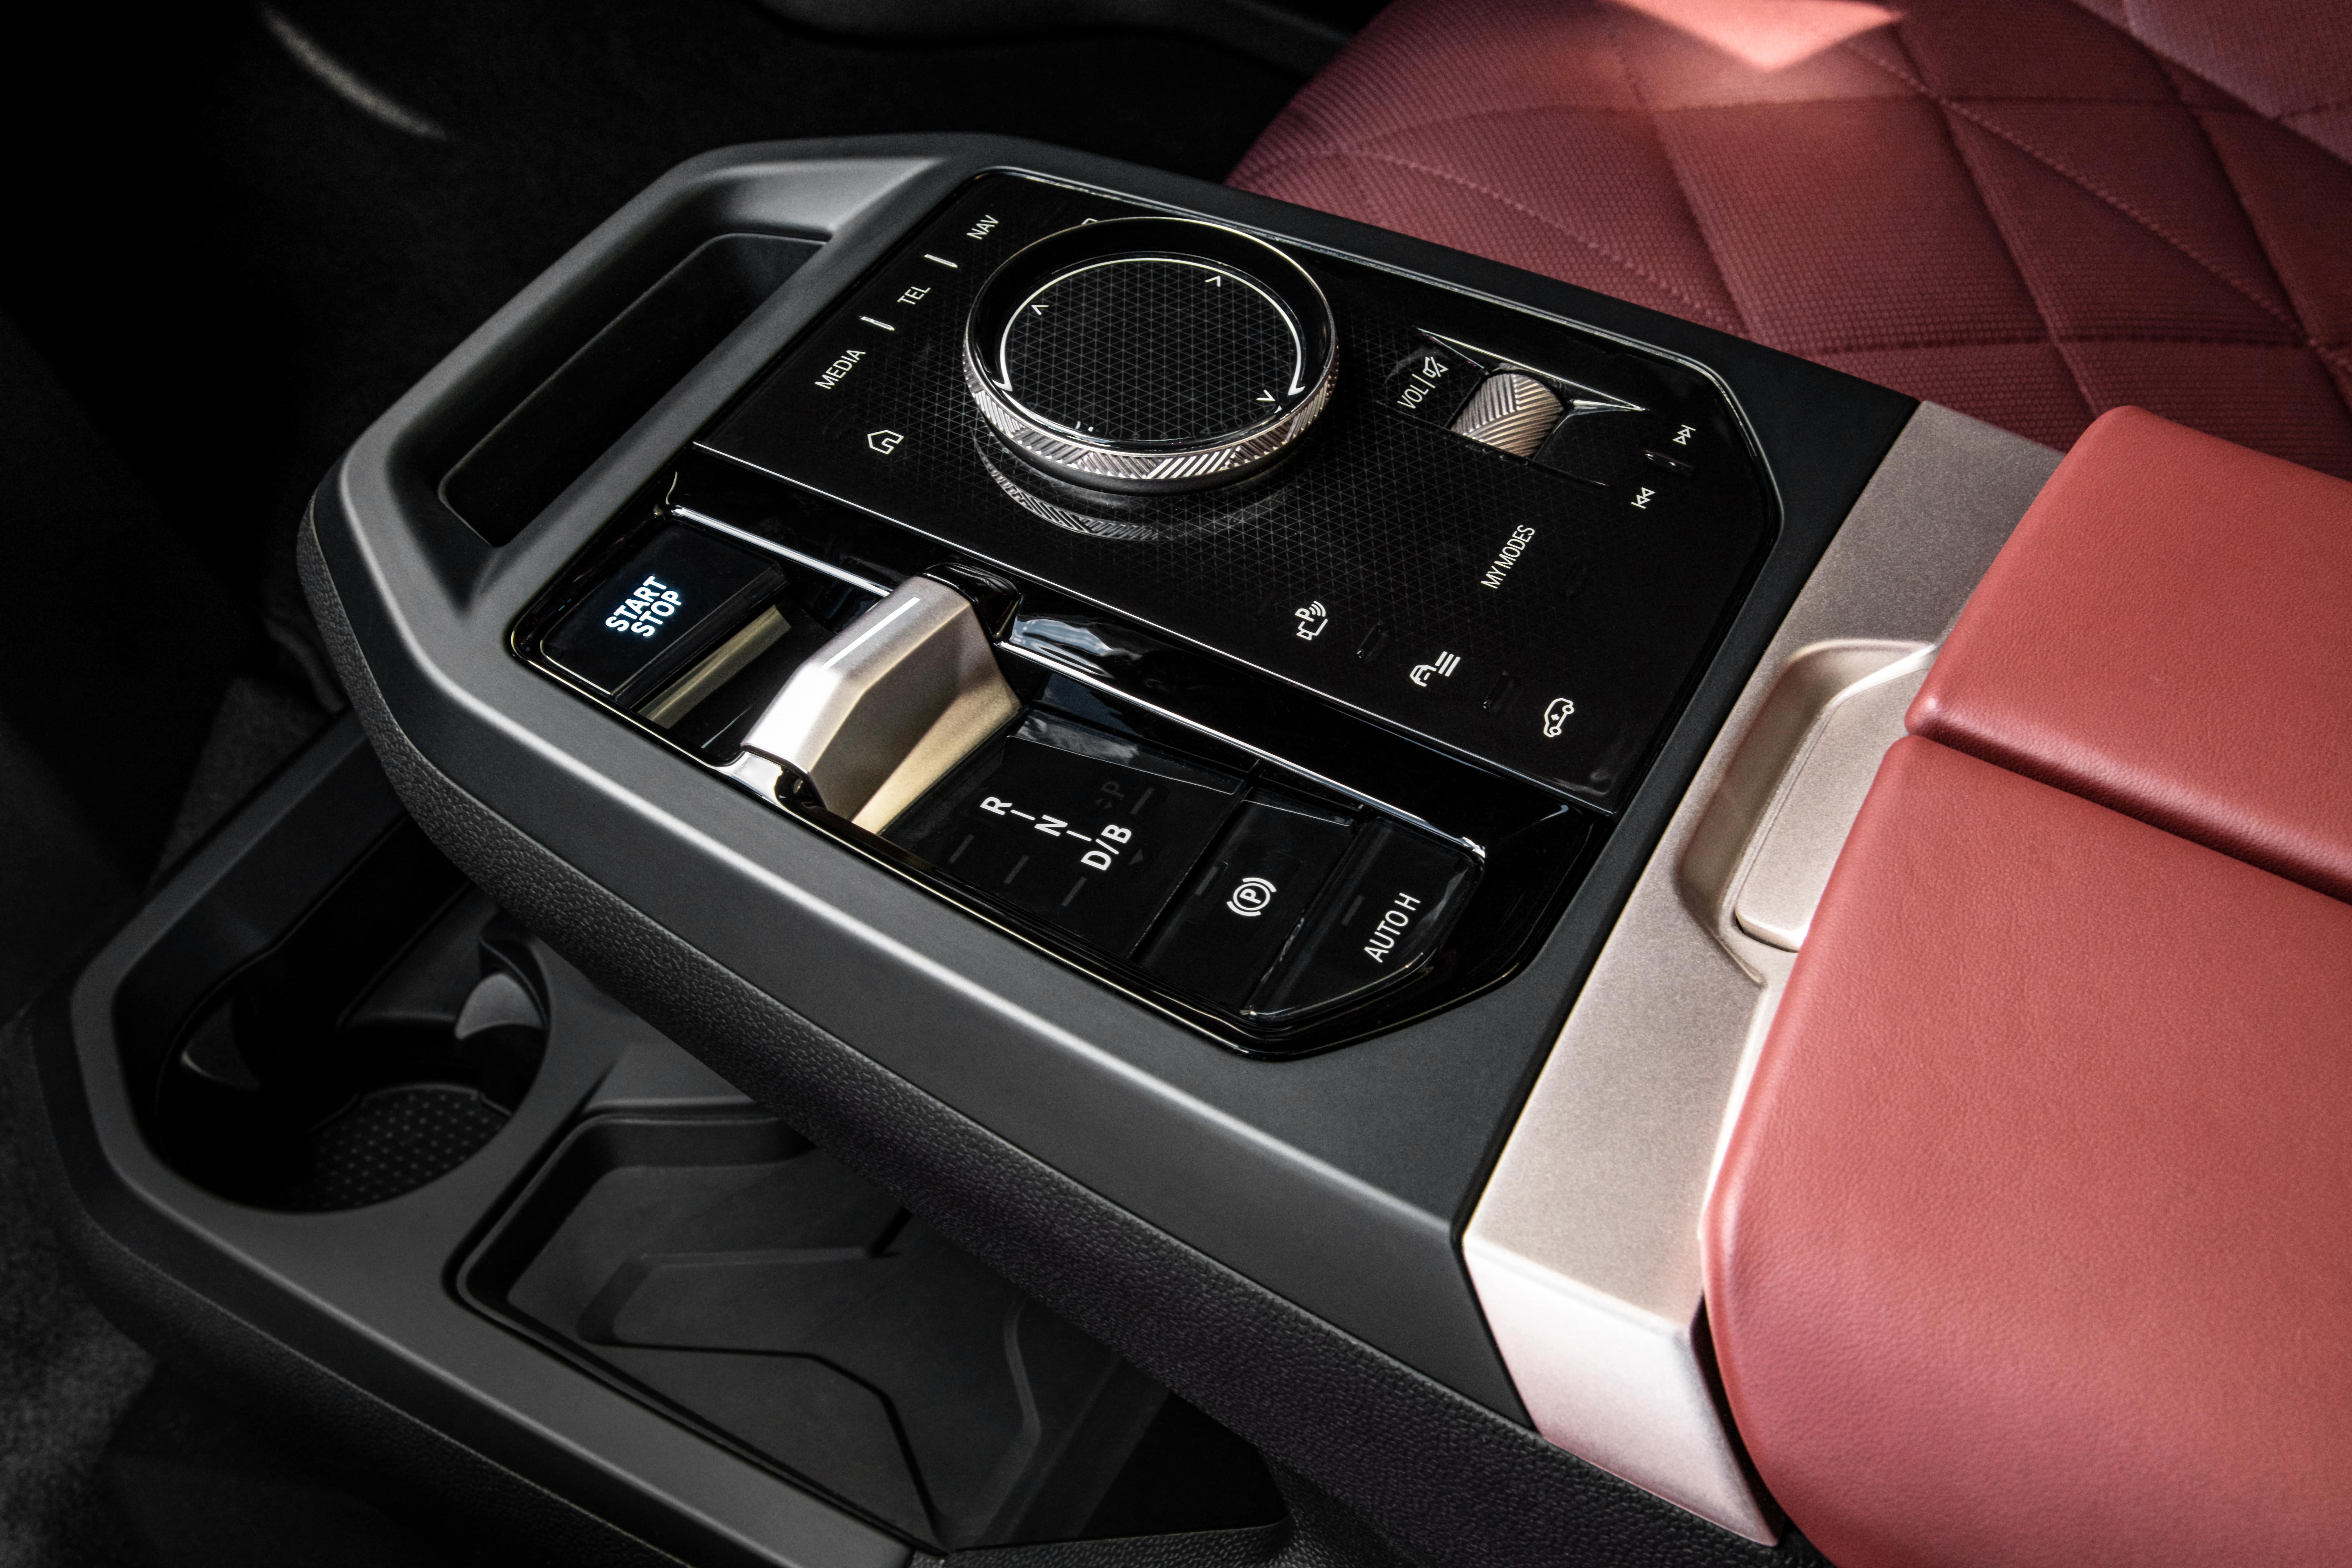 The basic option for the central console, which is still nice, <i>BMW</i>